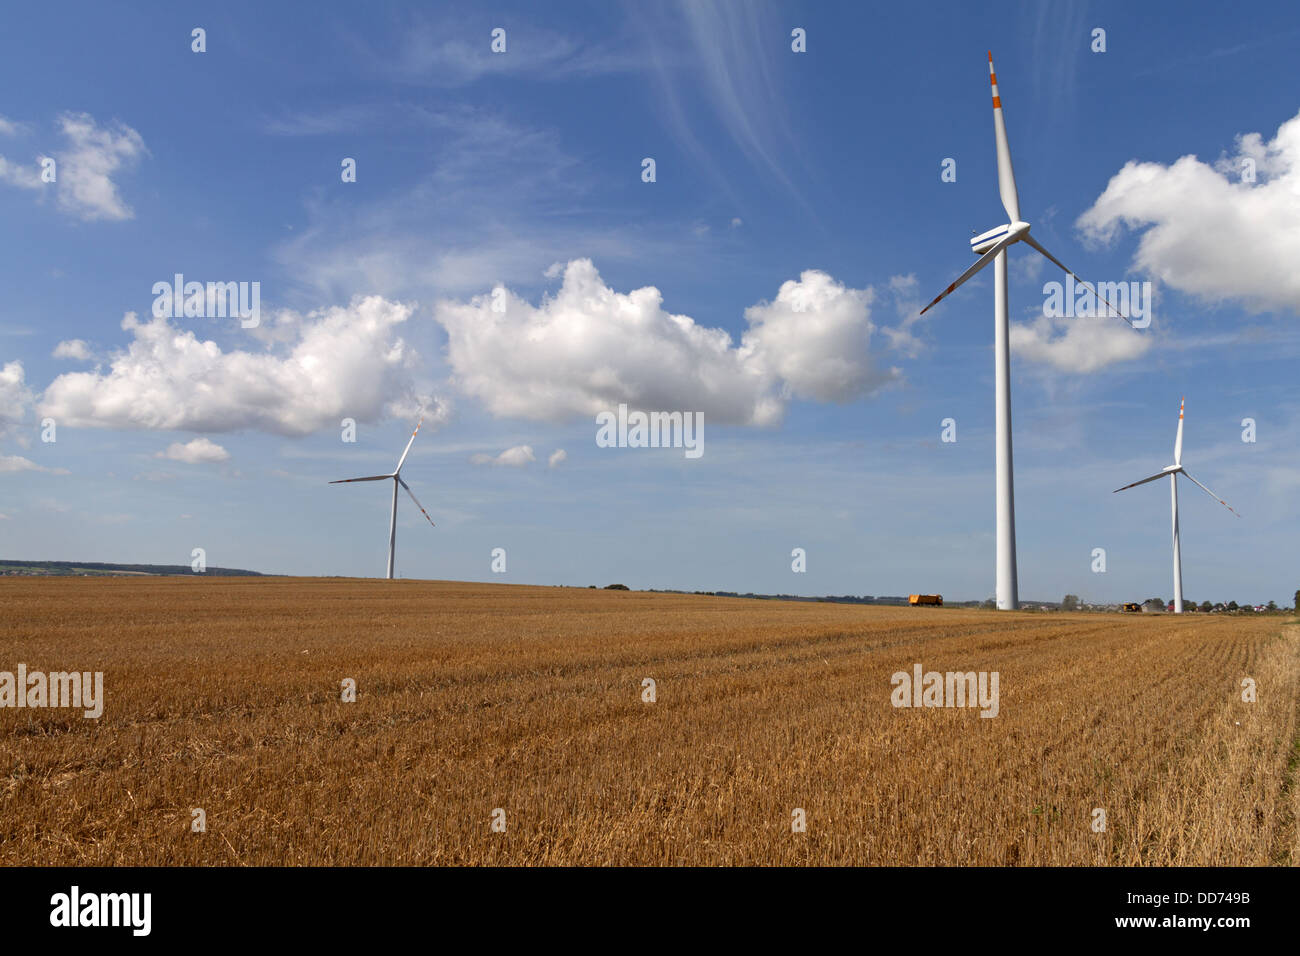 Windmills for renewable electric energy production Stock Photo